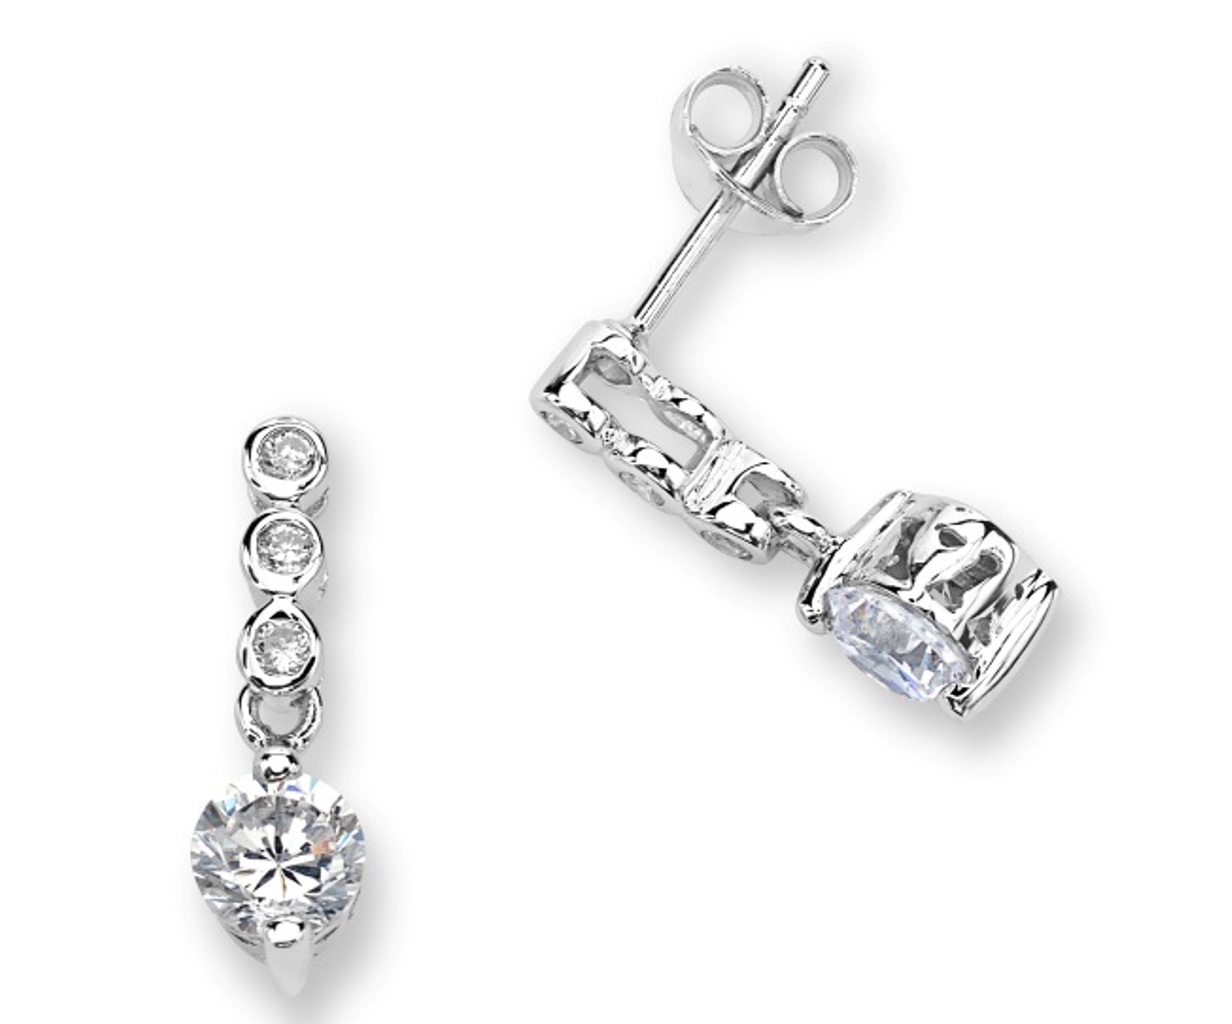 White CZ Earrings, Rhodium Plated Sterling Silver